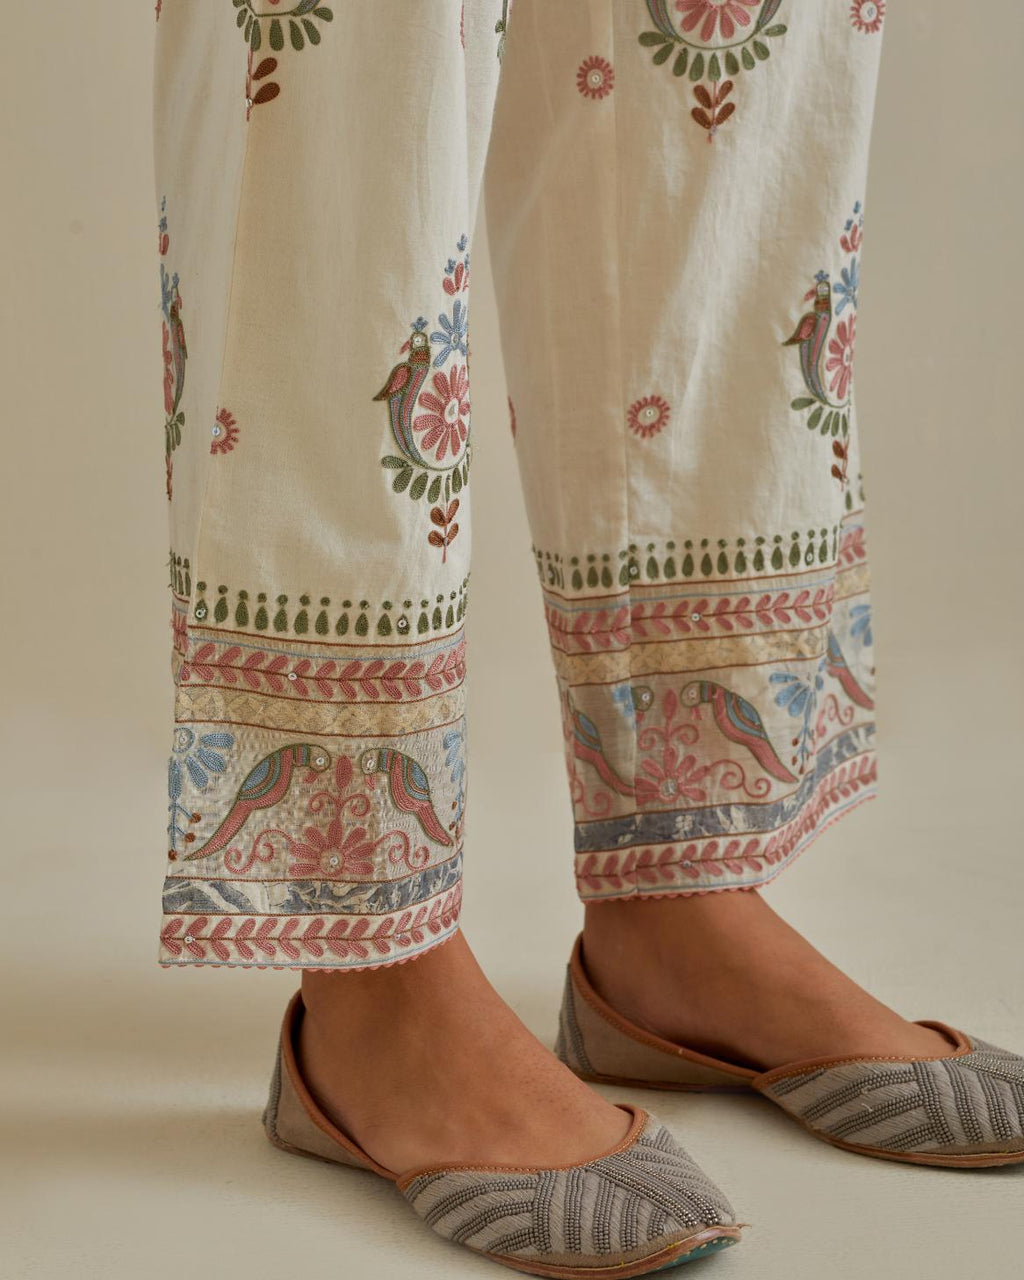 Pink and off-white straight pants with all over multi color embroidery detailed with sequins.